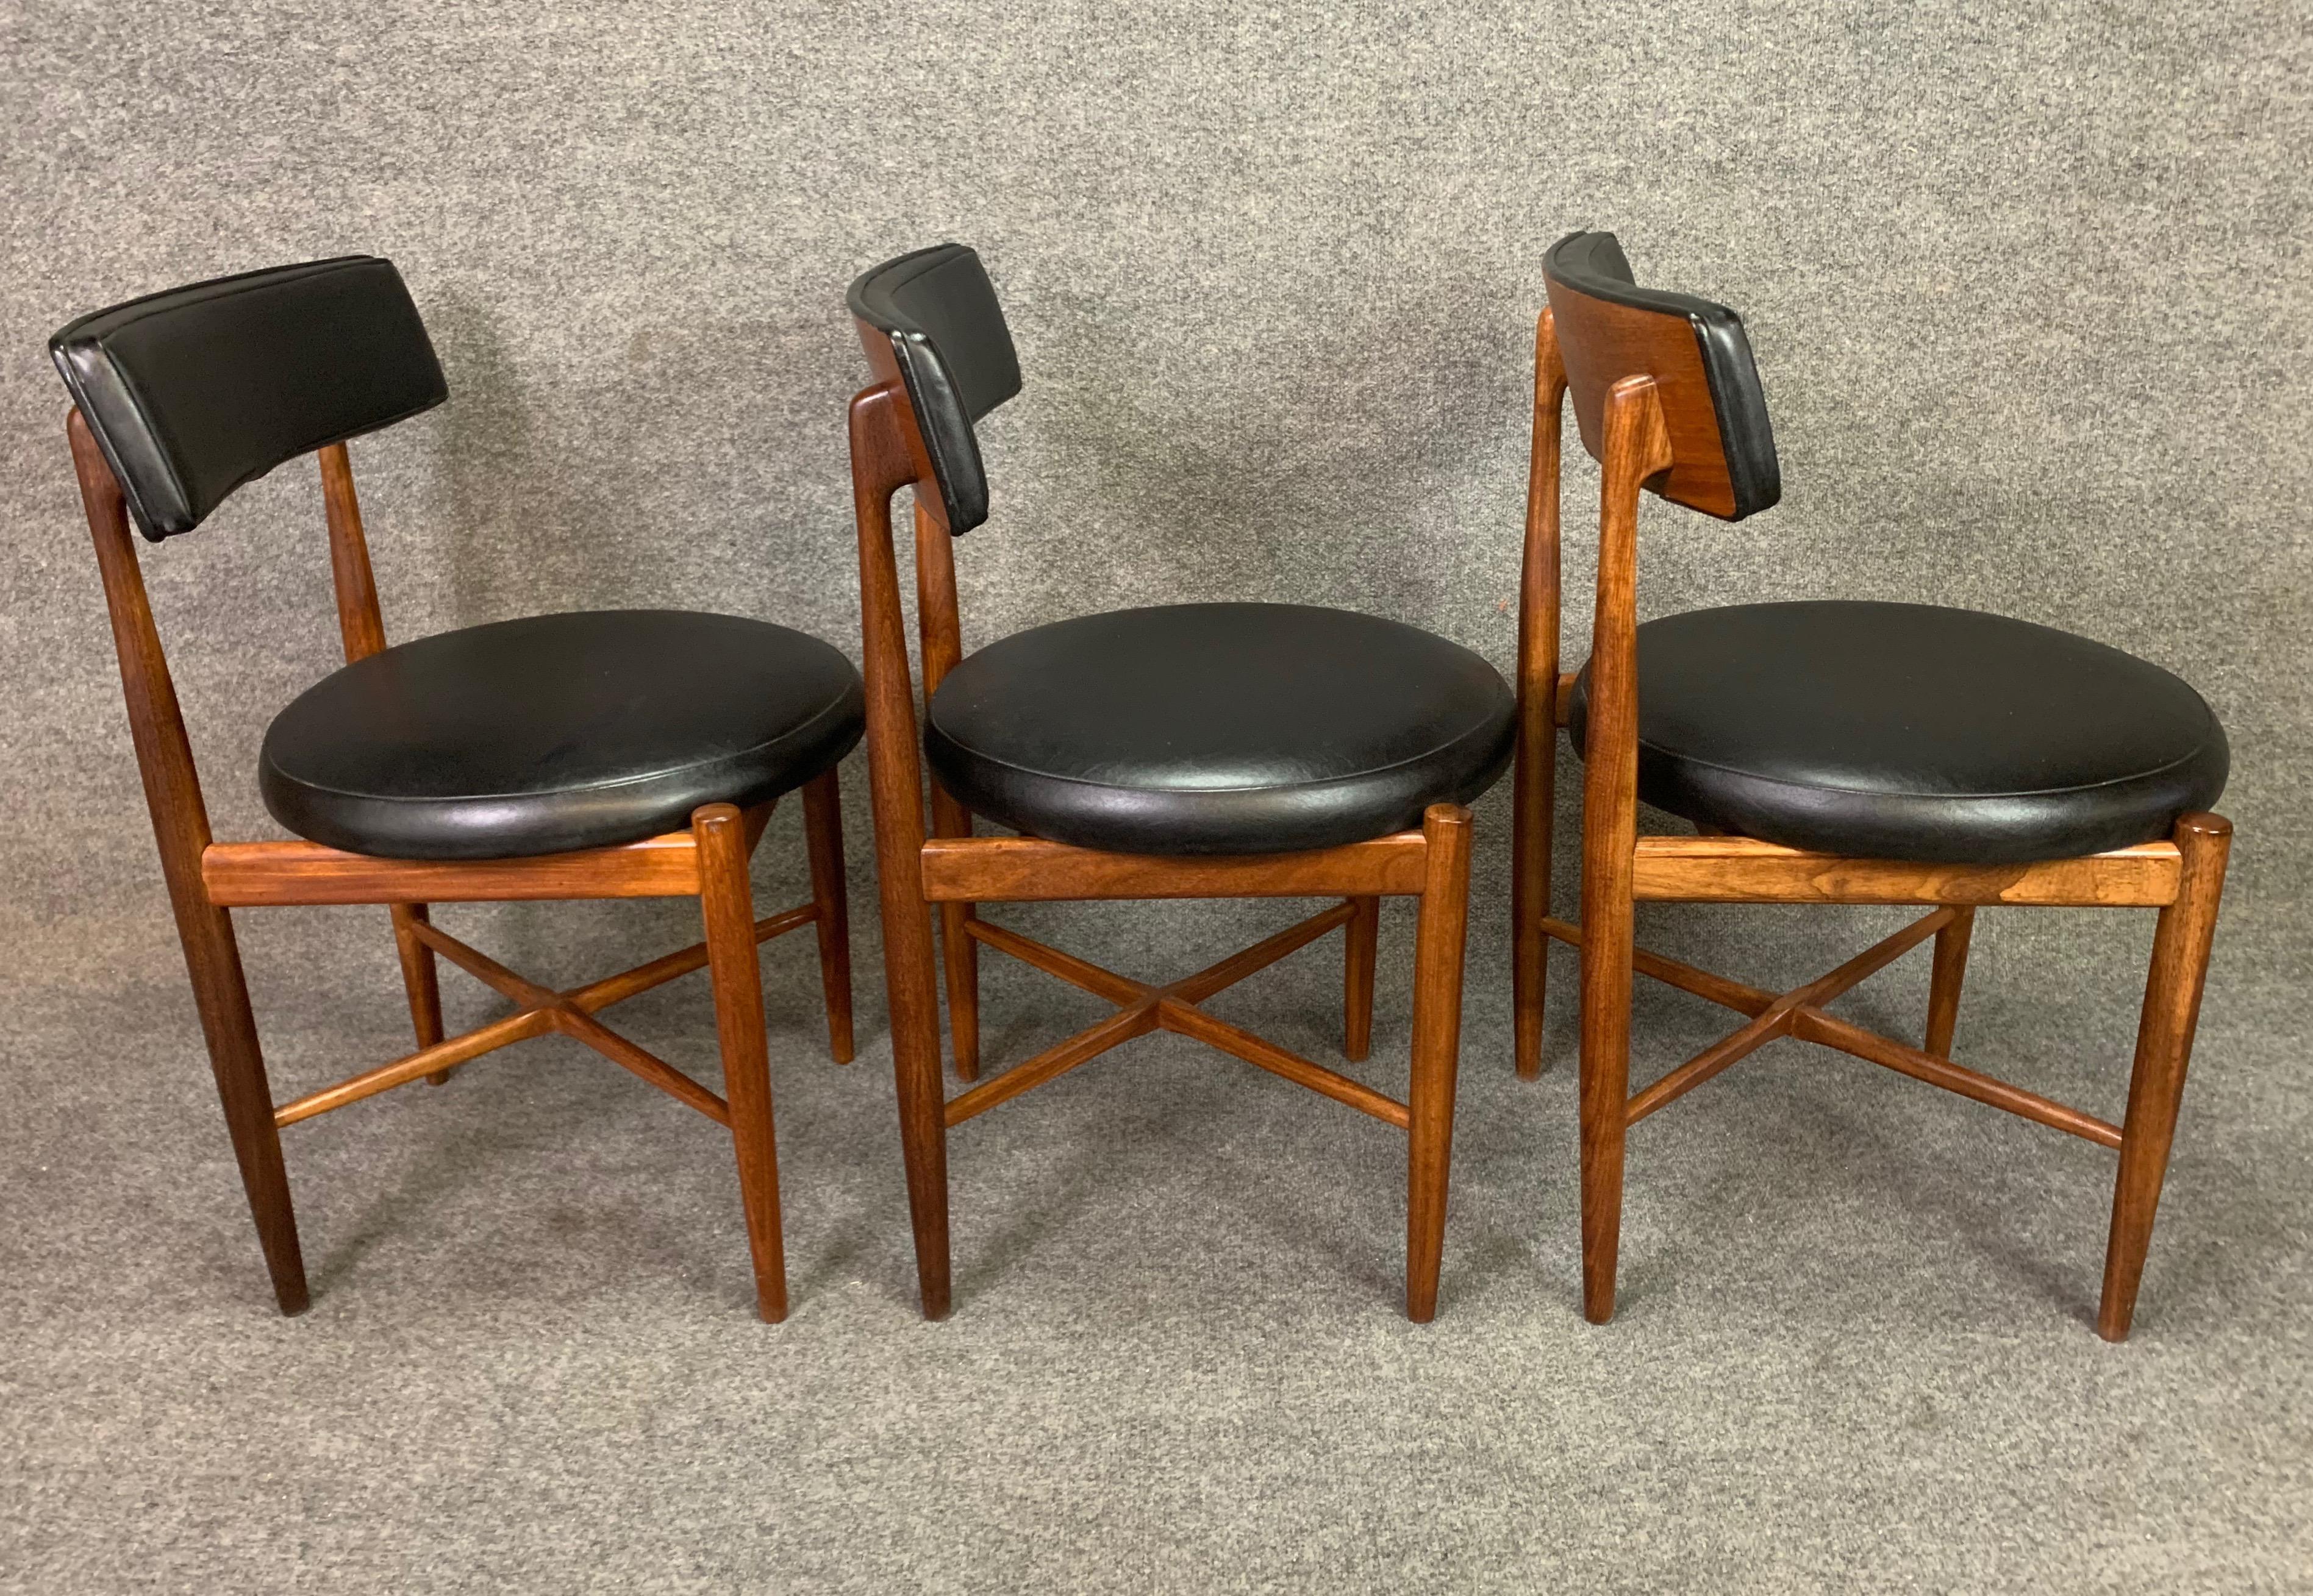 Six Vintage British Mid Century Teak Dining Chairs by Victor Wilkins for G Plan 1